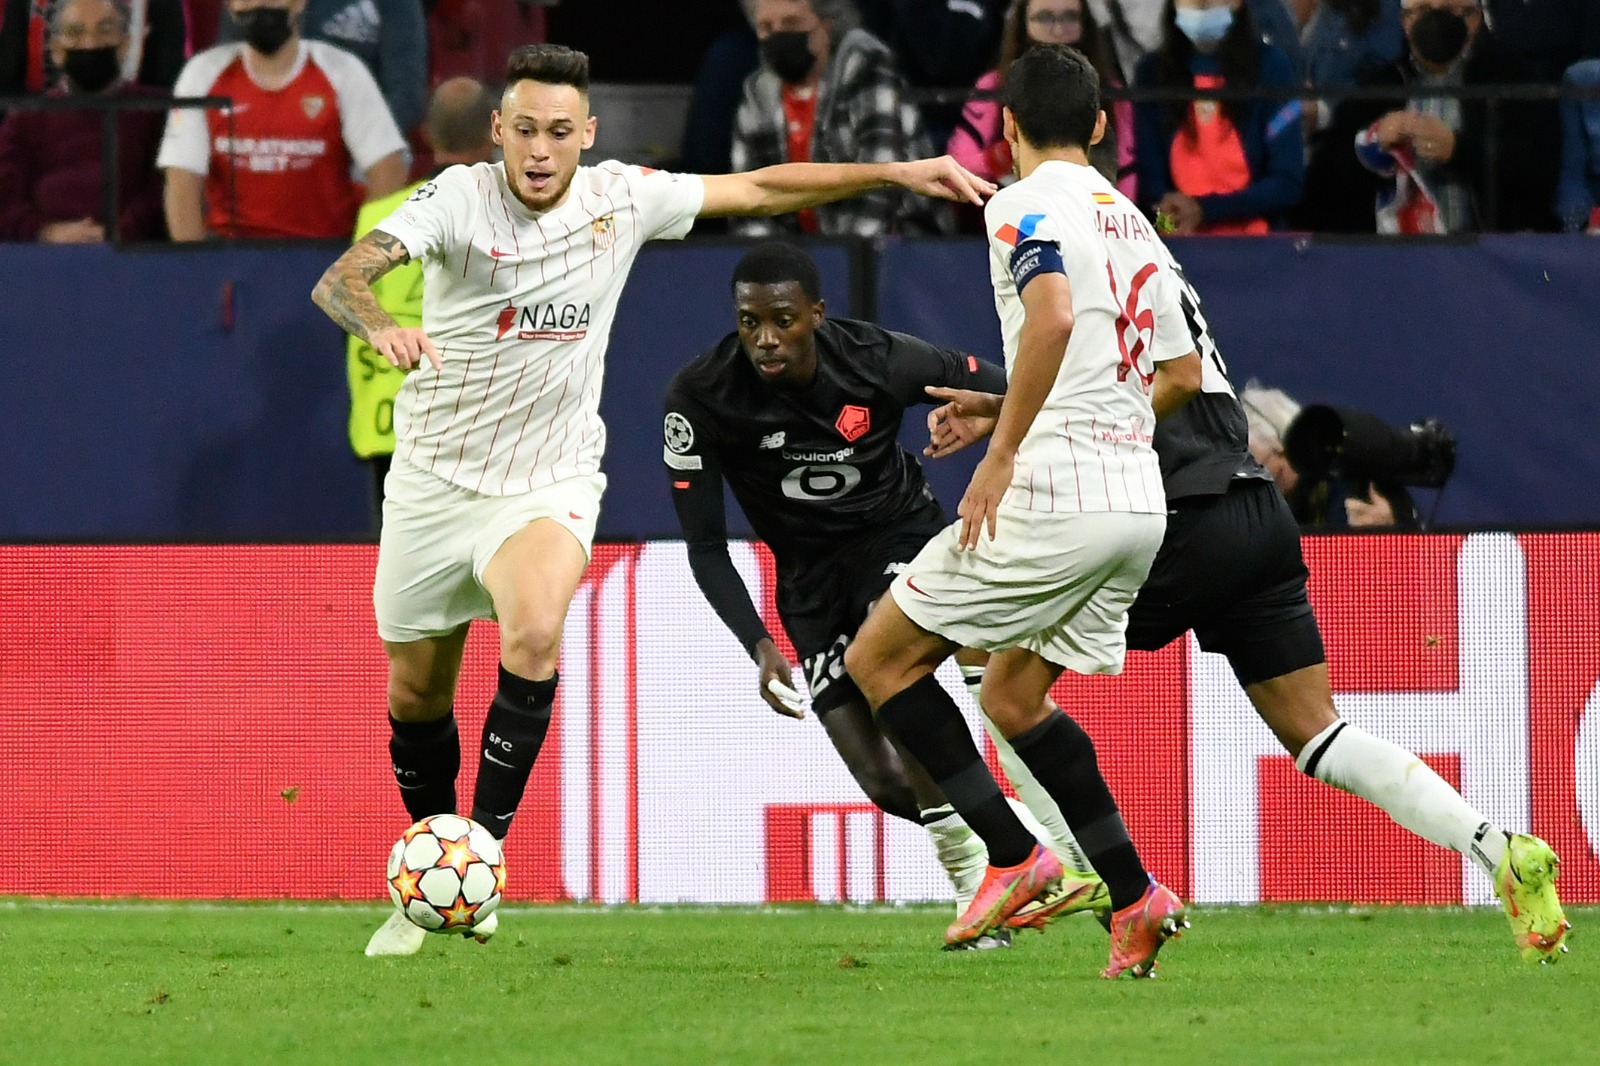 Action from Sevilla FC against LOSC Lille